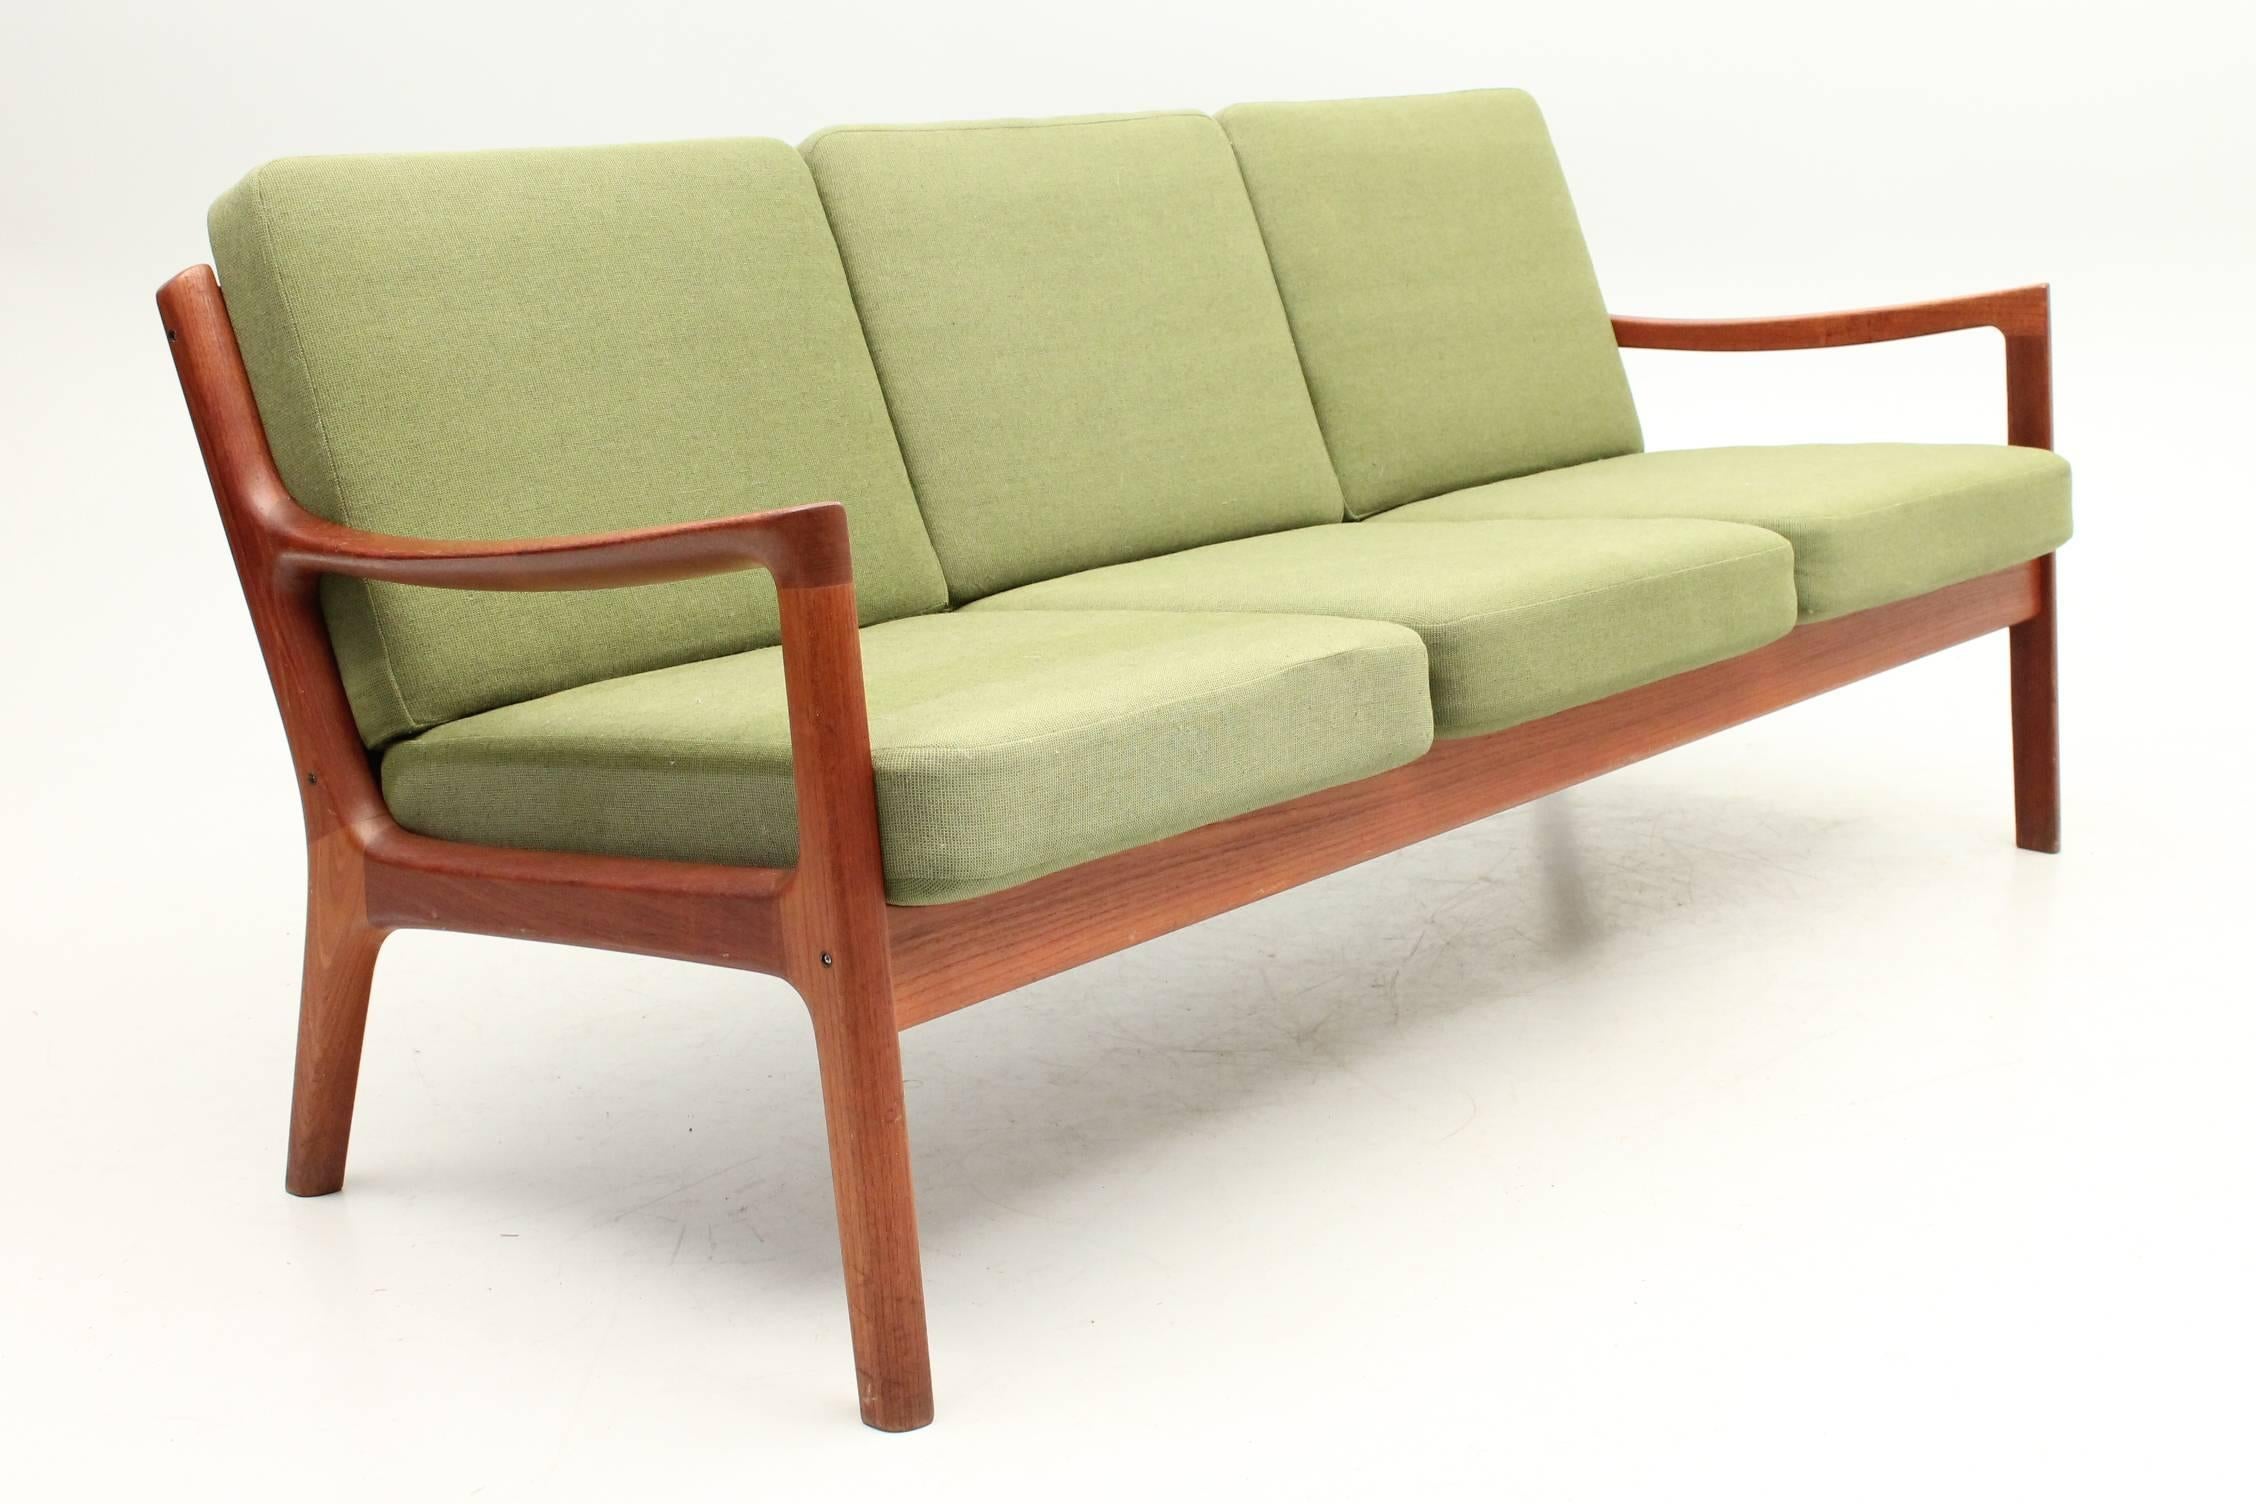 Gorgeous three-seat sofa and matching chair designed by Ole Wanscher for France and Son. The cushions are made out of green fabric that sit perfectly in the teak frame. This set is in excellent condition with very little signs of wear or use.